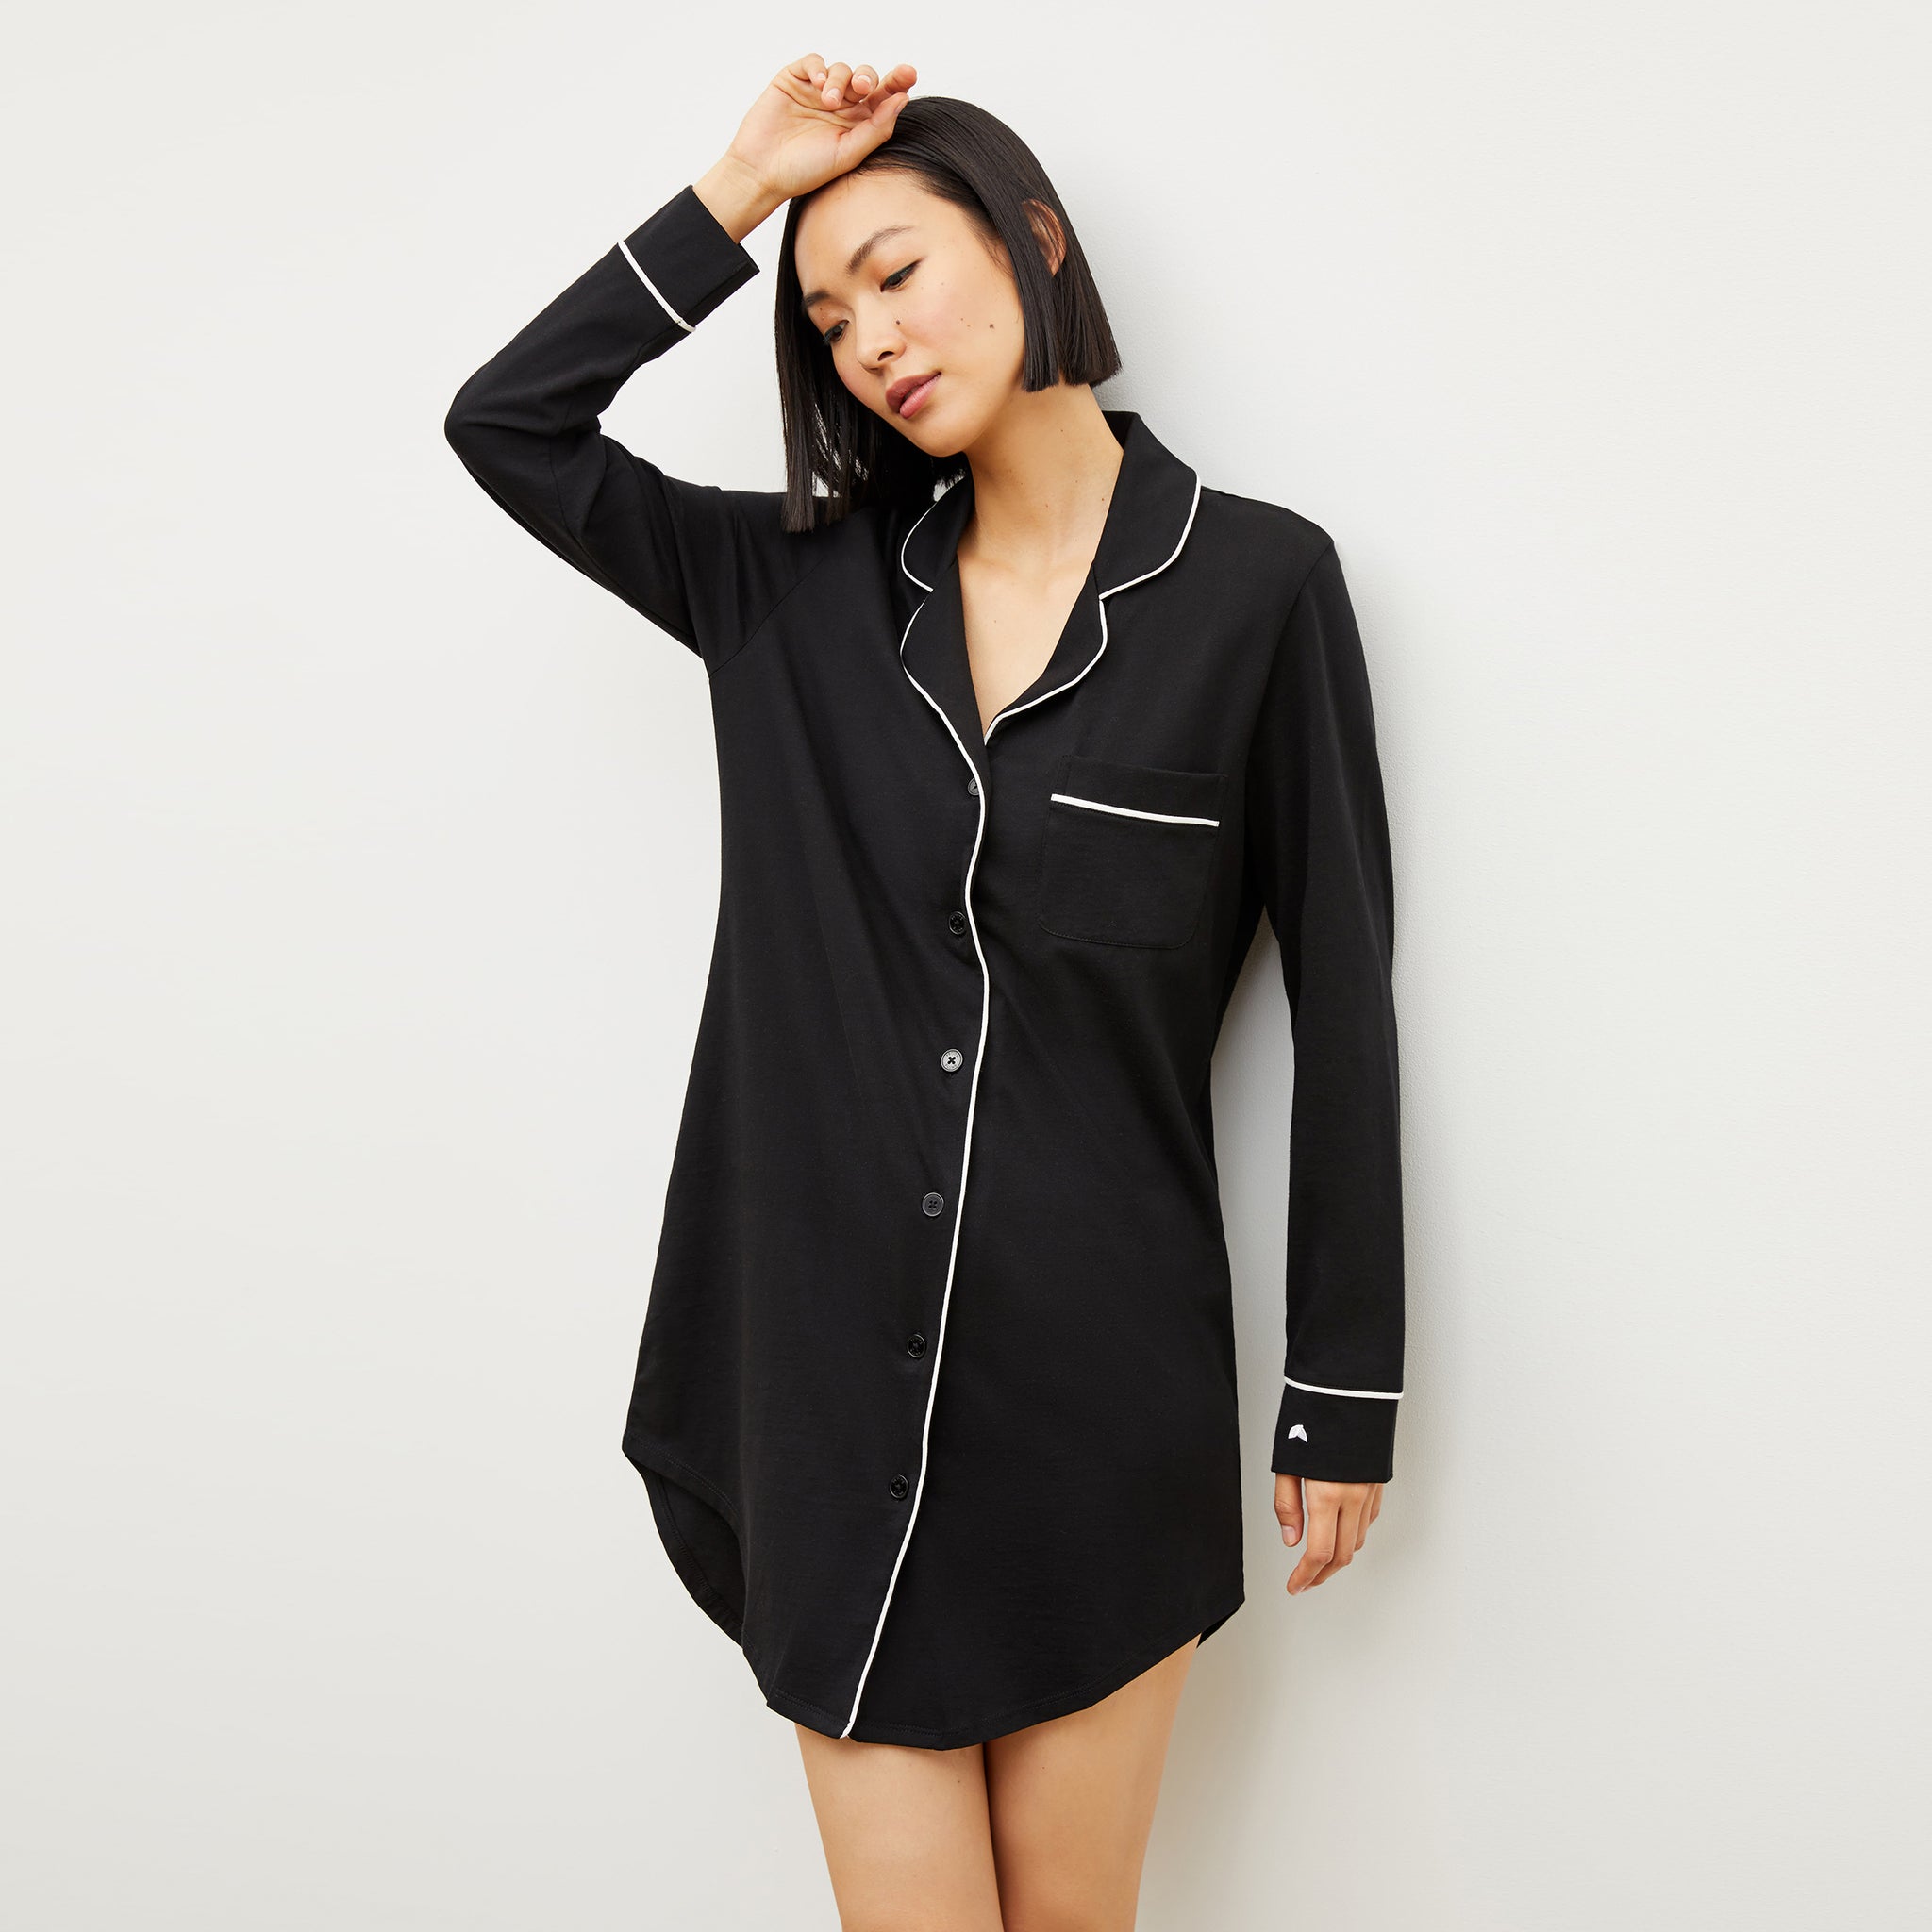 Front image of a woman wearing the Petite Plume x M.M. Pima Nightshirt in Black 